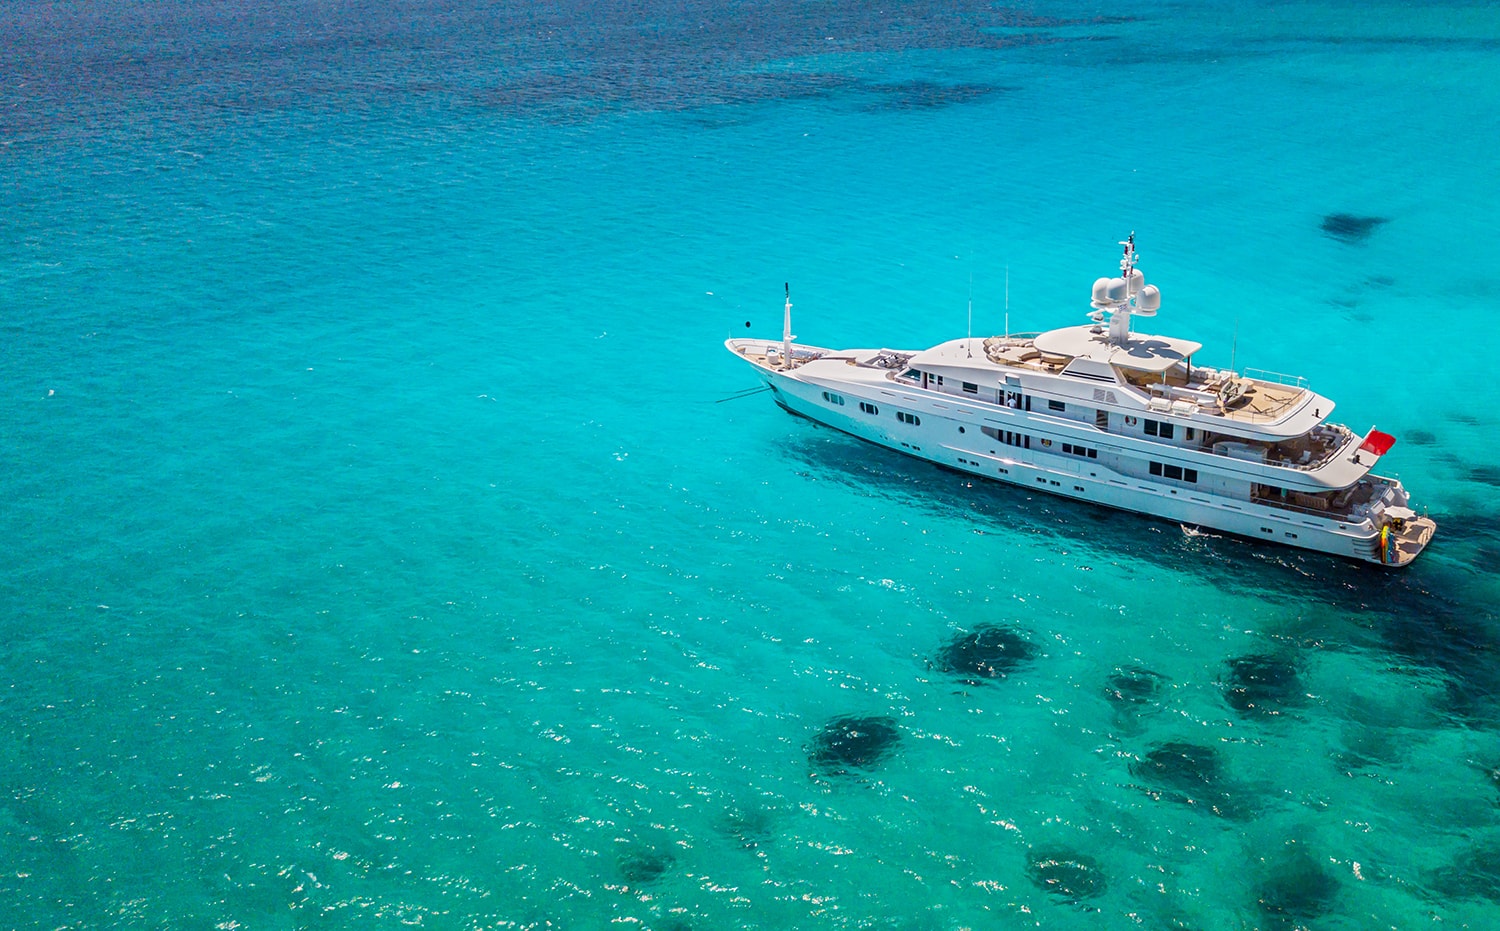 Big luxury yacht anchoring in shallow water, aerial view. Active life style, water transportation and marine sport.